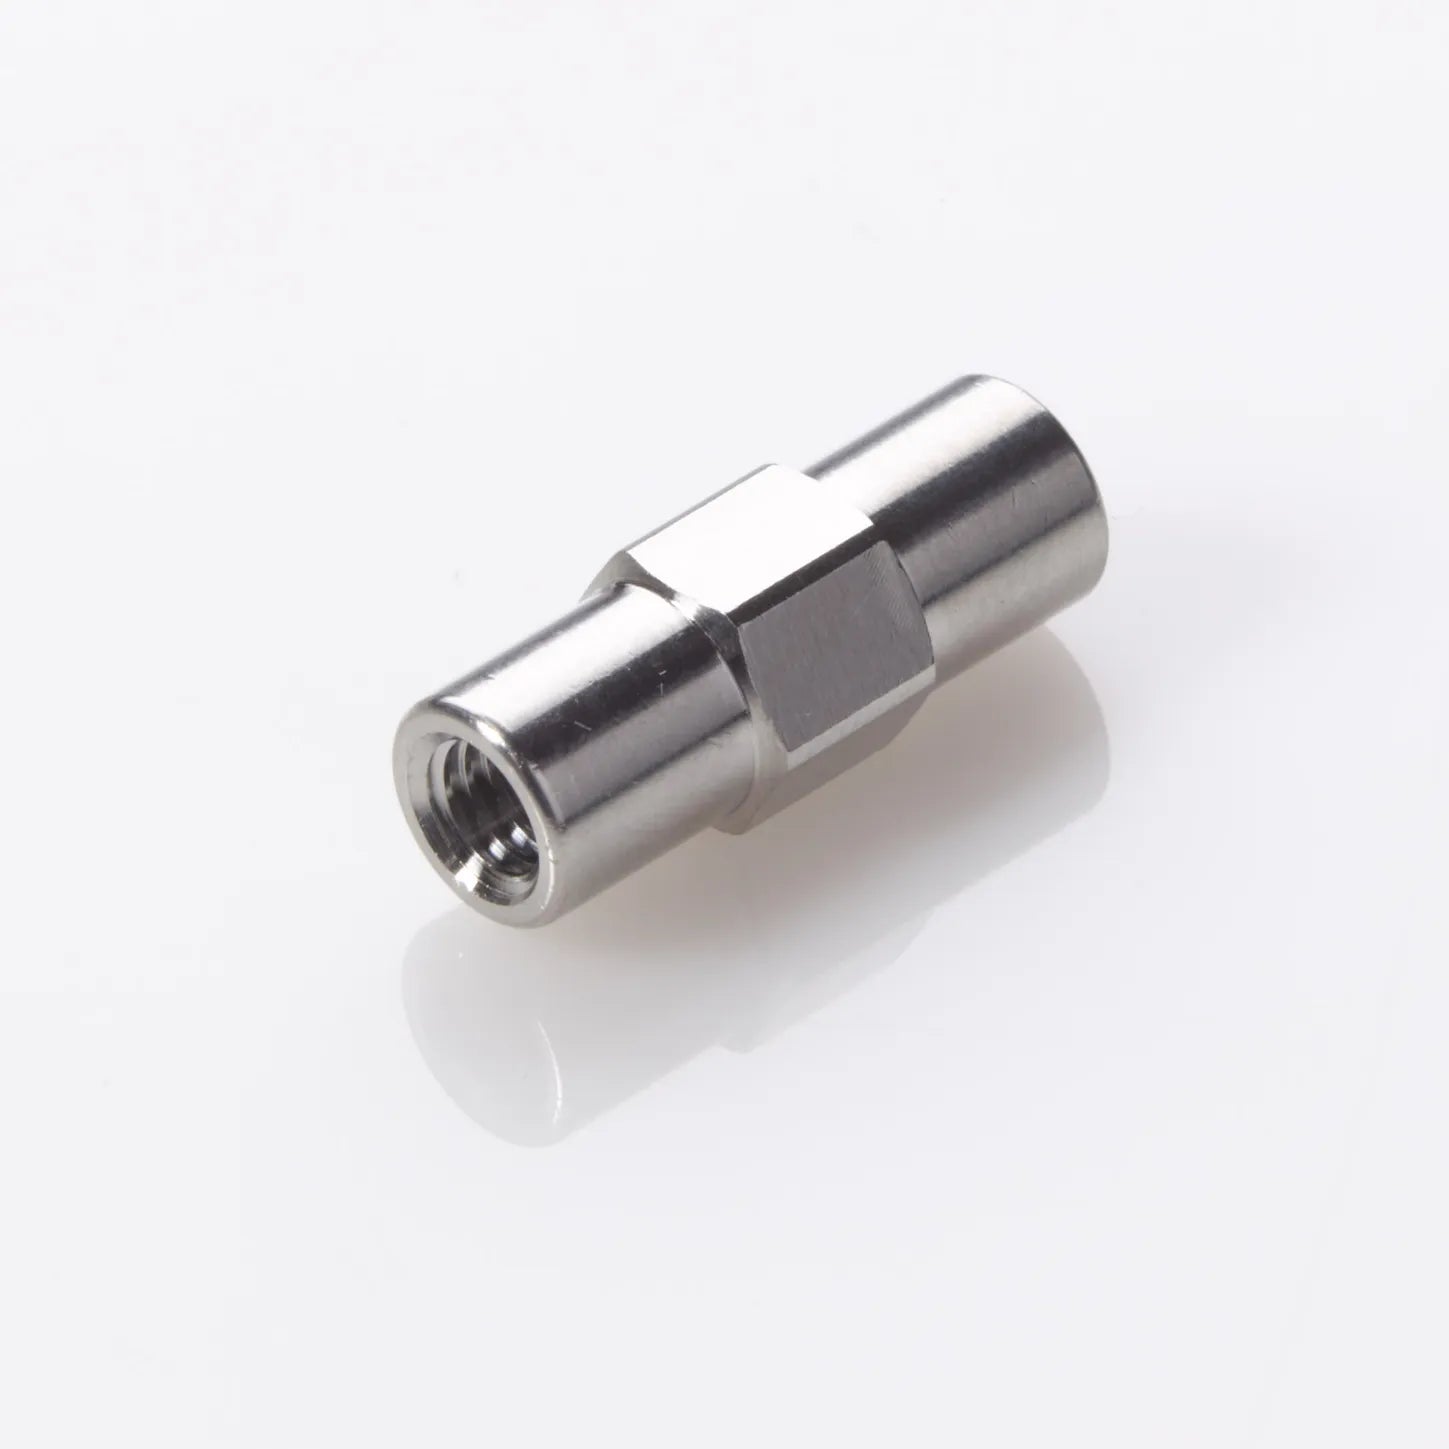 Connector Union ZDV Stainless Steel 0.007" (0.18mm) Thru-Hole for 1/16" OD Tubing (Union Body Only)